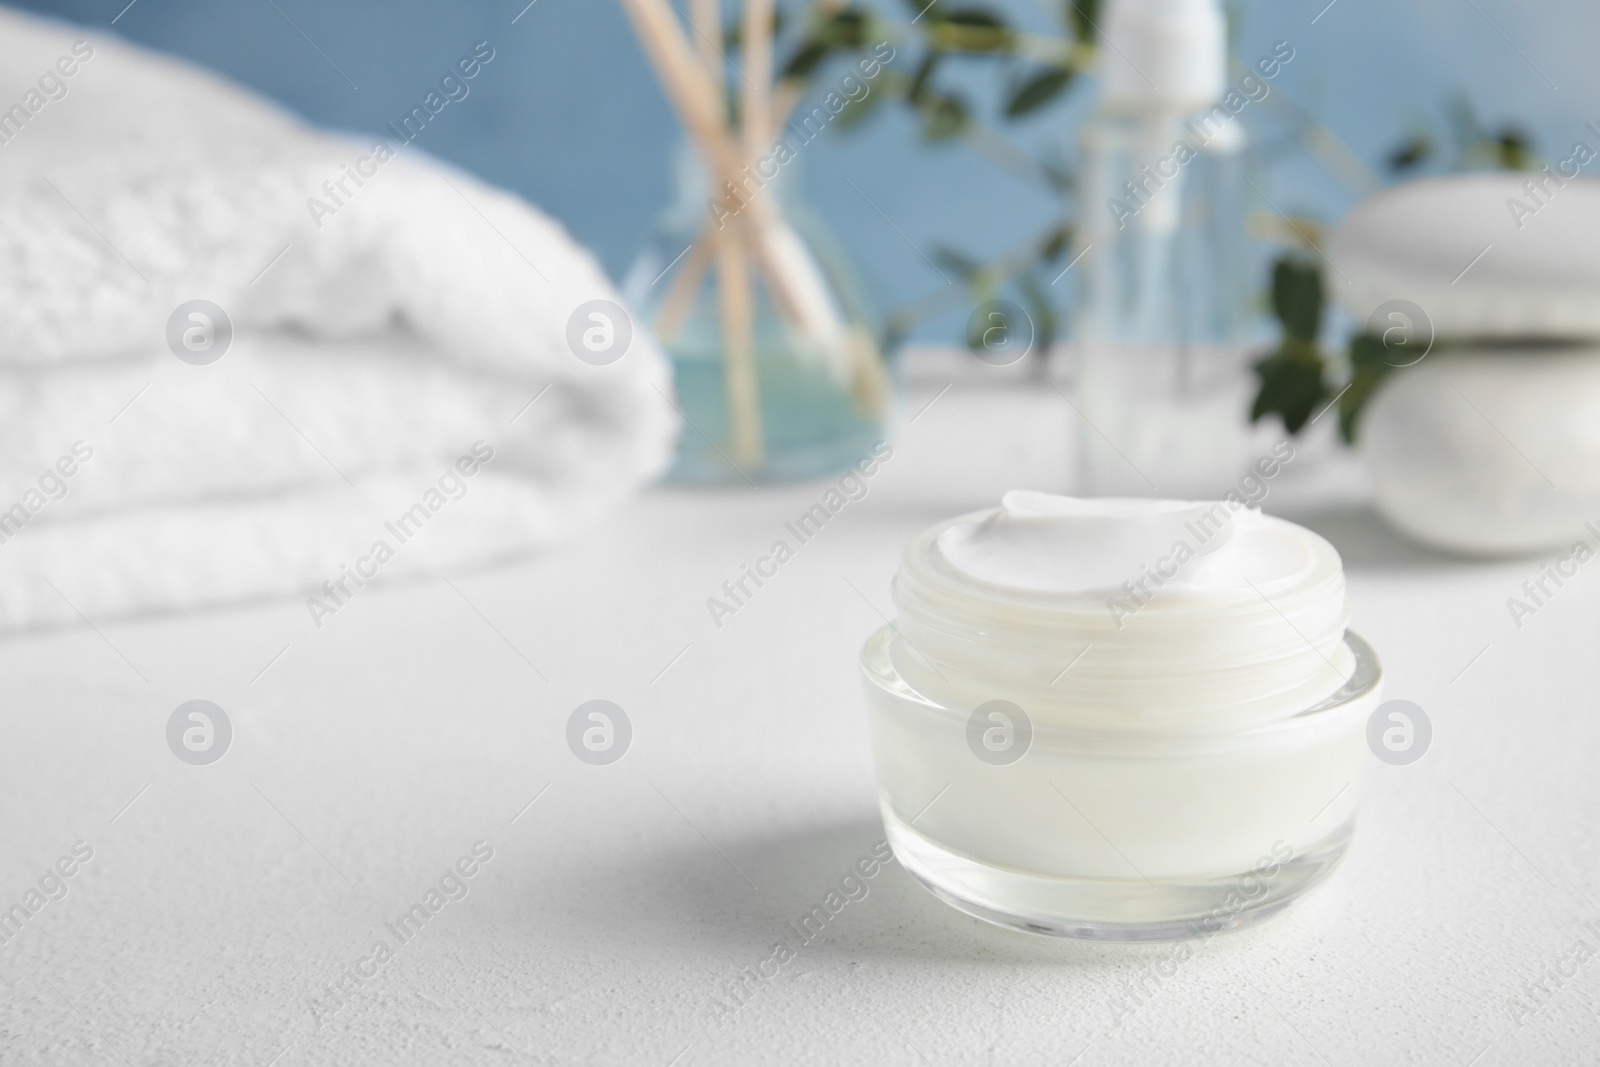 Photo of Jar of body care product on table. Space for text